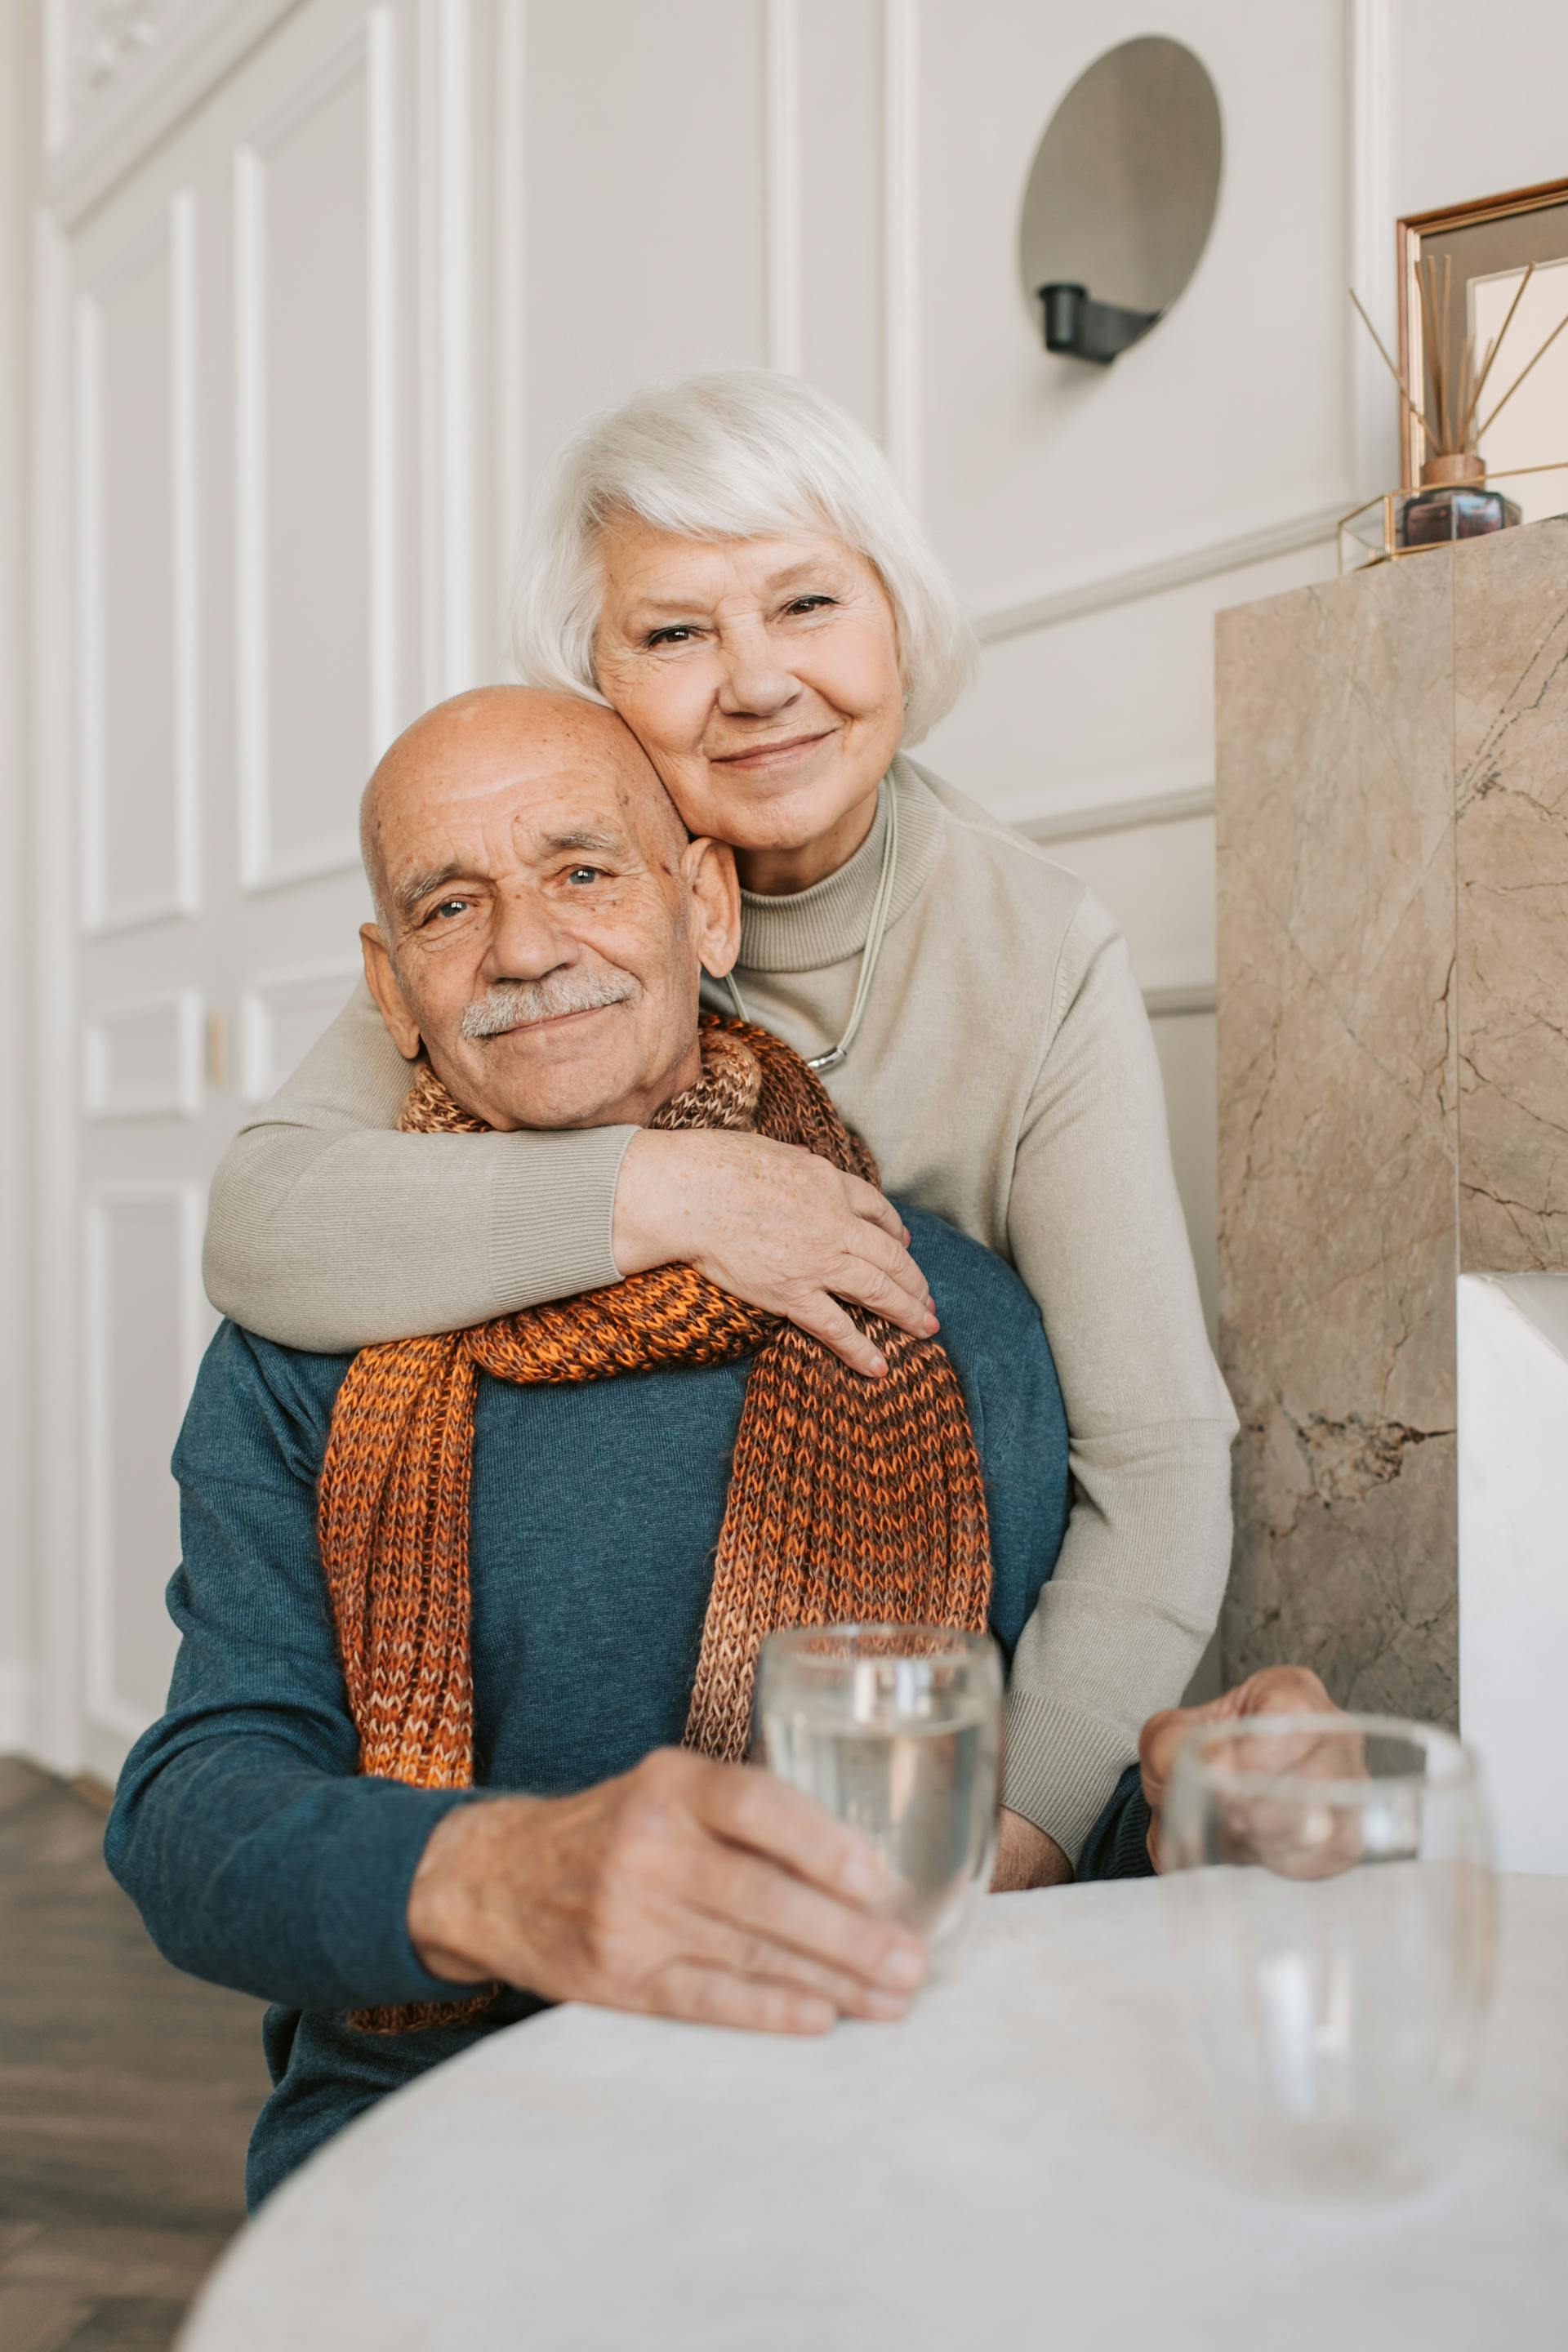 A smiling old couple | Source: Pexels